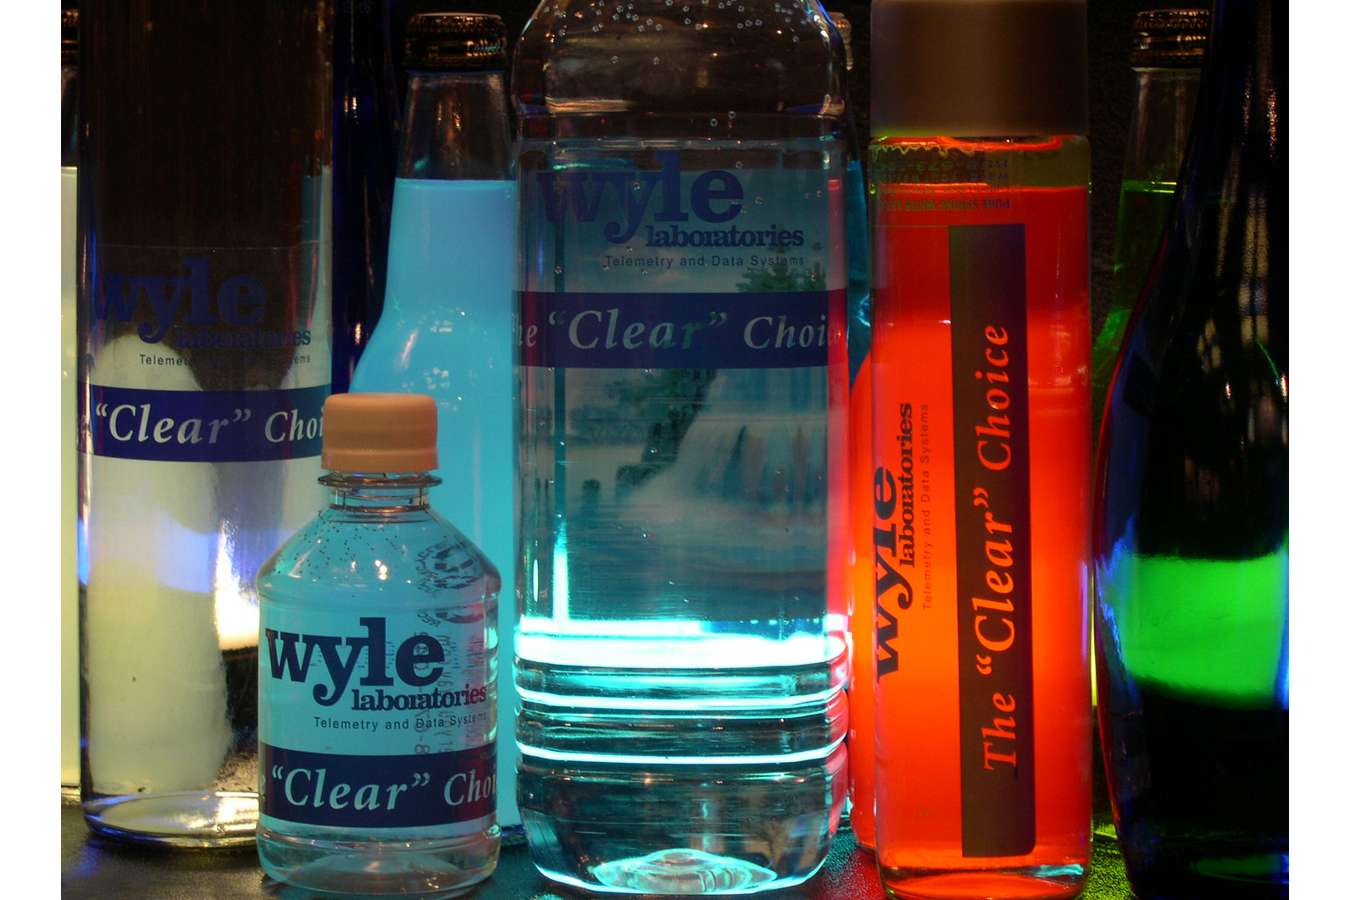 Wyle water 2 : Clear Choice Bar event